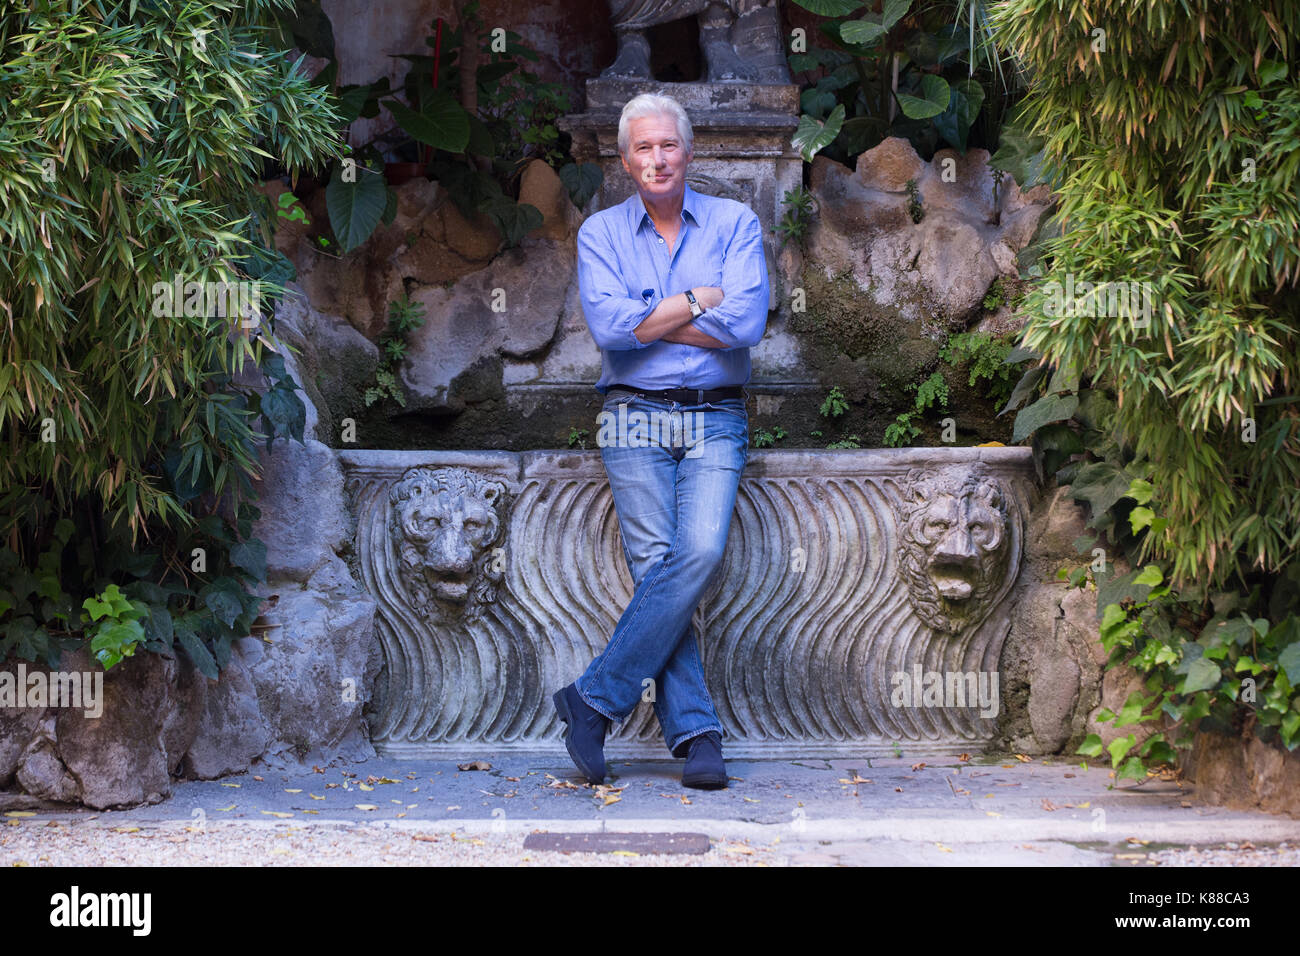 Roma, Italy. 18th Sep, 2017. Photocall with US actor Richard Gere in Rome for his new film "Norman: The Moderate Rise and Tragic Fall of a New York Fixer" (in Italian: "L'incredibile vita di Norman"). Credit: Matteo Nardone/Pacific Press/Alamy Live News Stock Photo